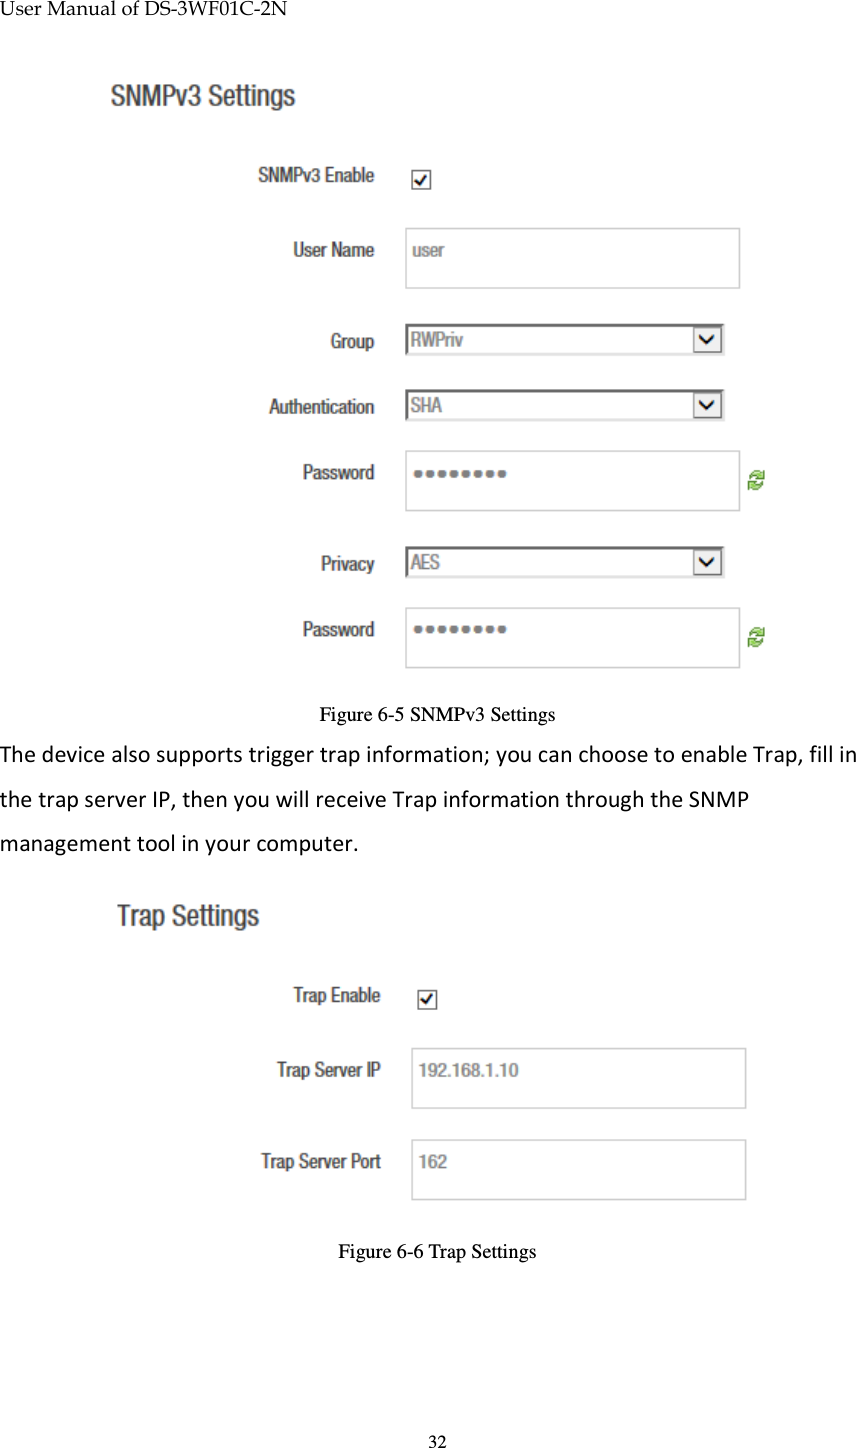 User Manual of DS-3WF01C-2N   32 Figure 6-5 SNMPv3 Settings The device also supports trigger trap information; you can choose to enable Trap, fill in the trap server IP, then you will receive Trap information through the SNMP management tool in your computer.  Figure 6-6 Trap Settings  